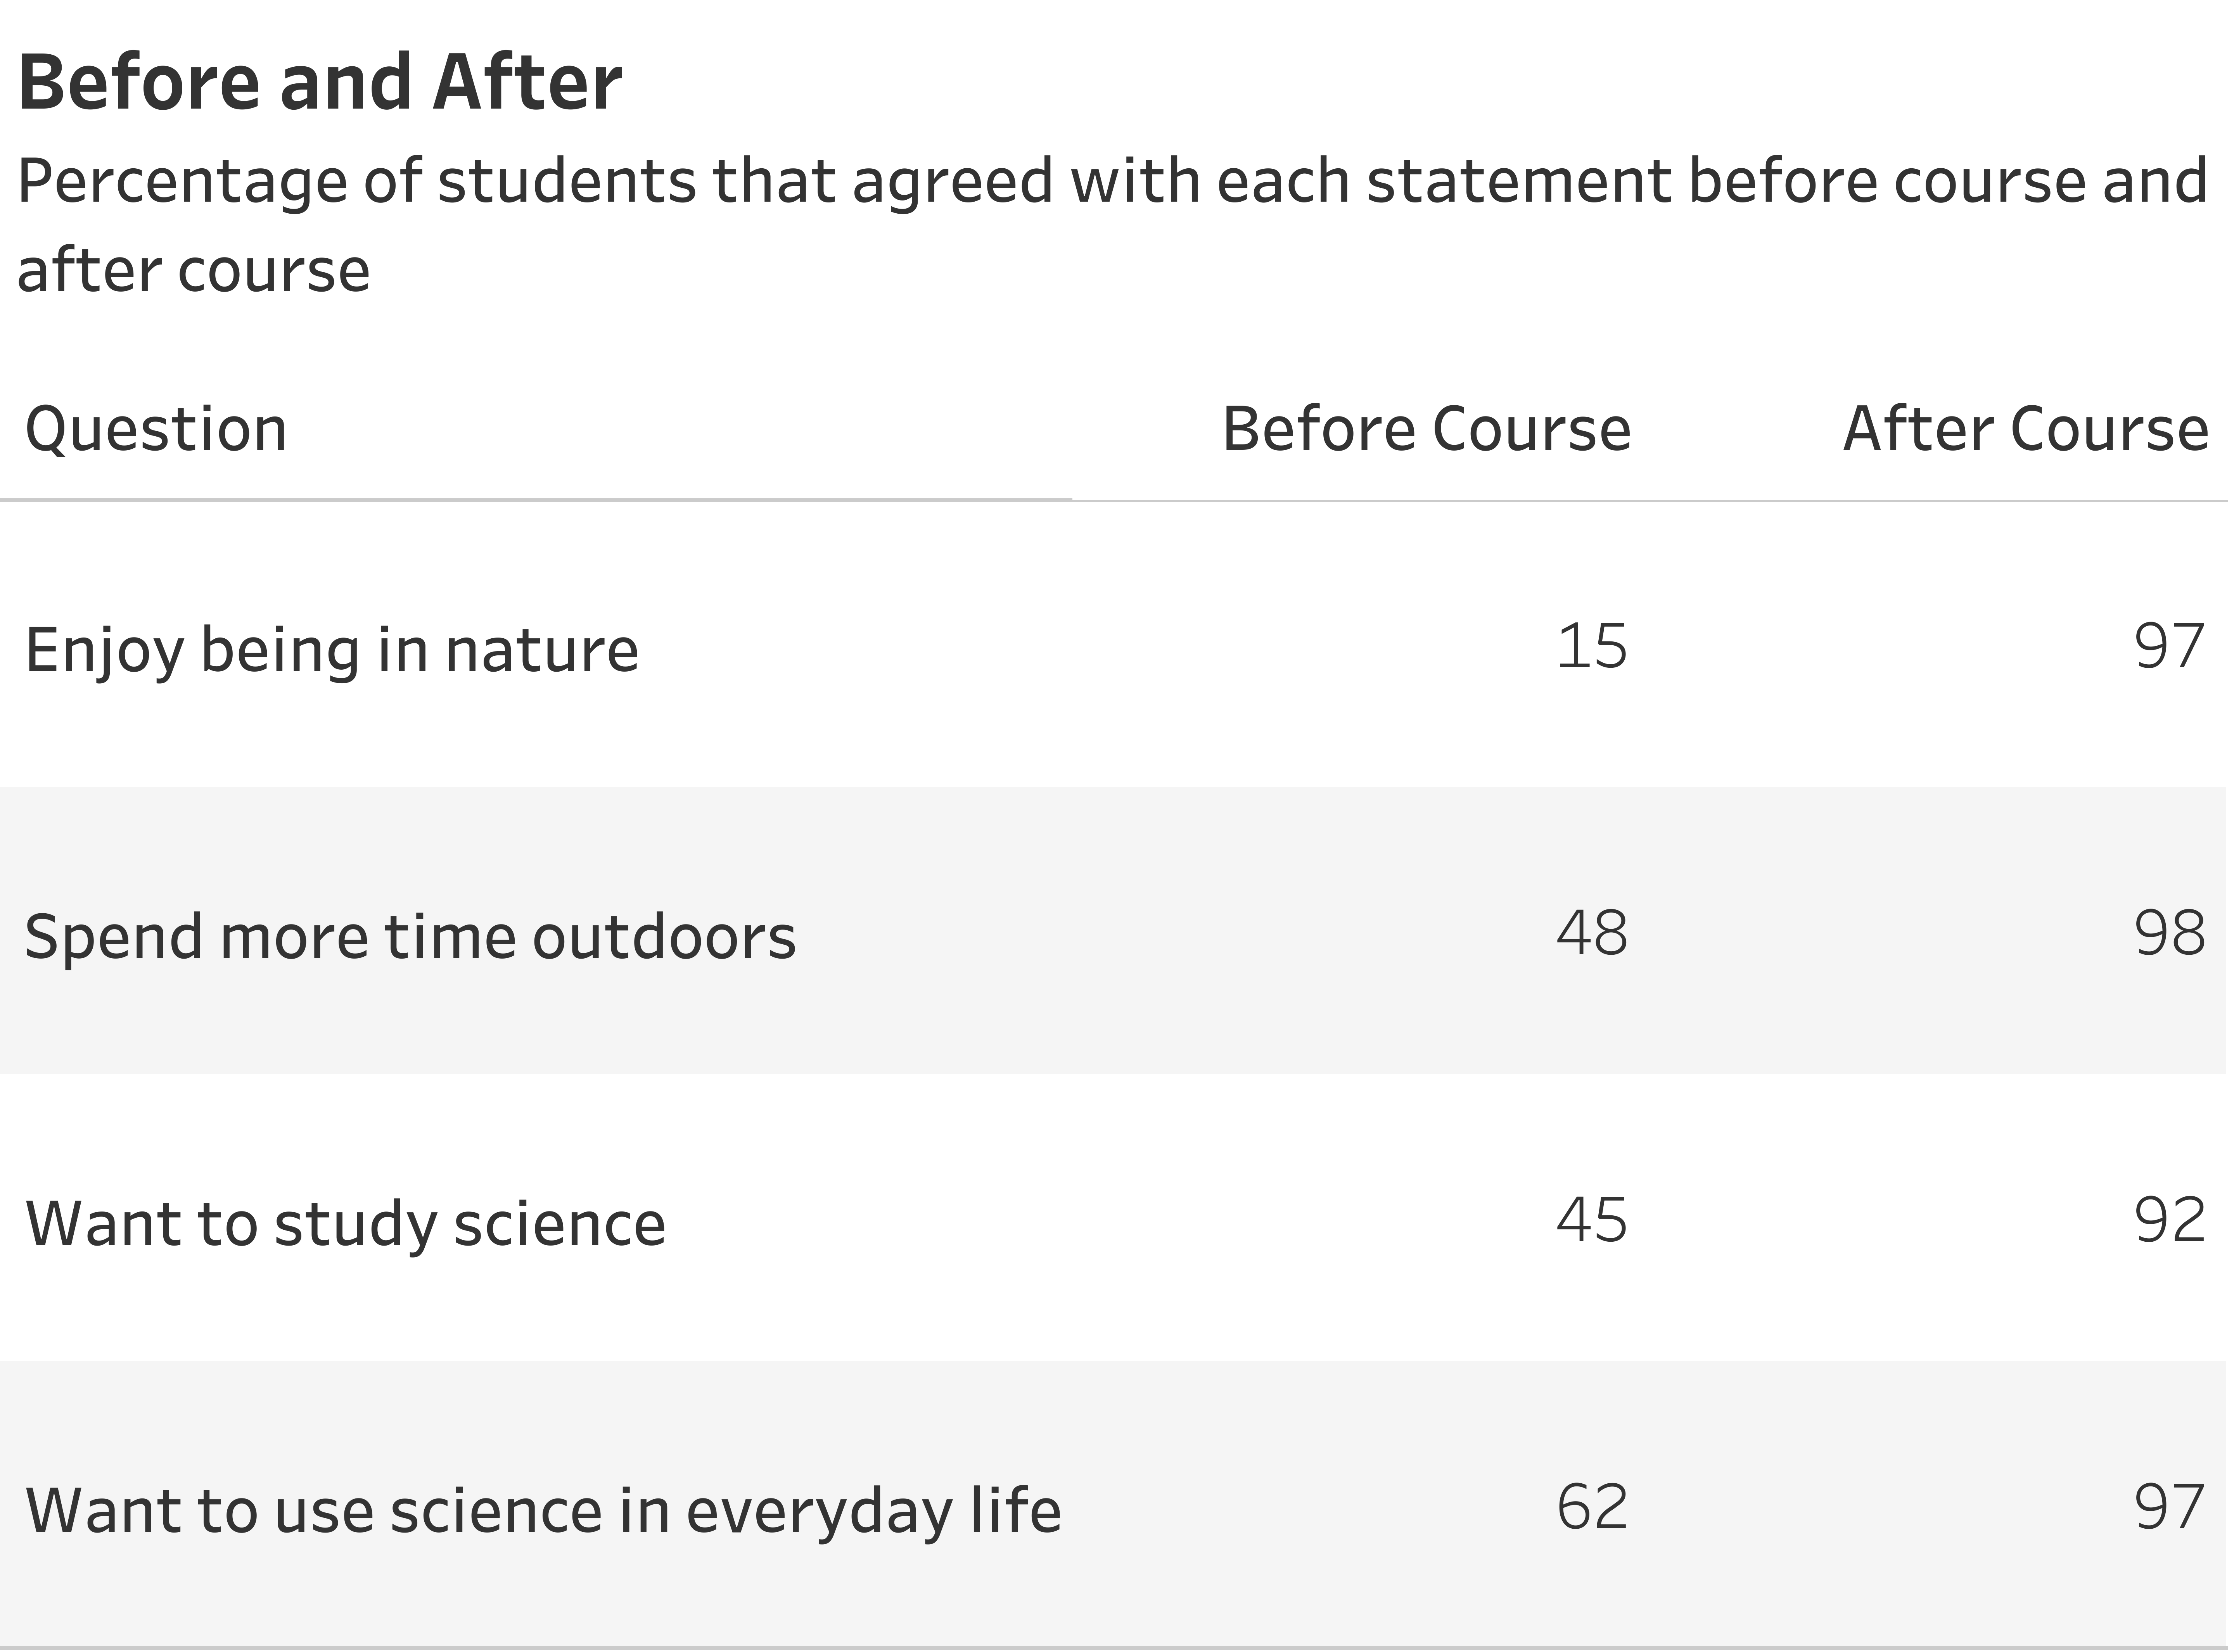 Before and After survey data